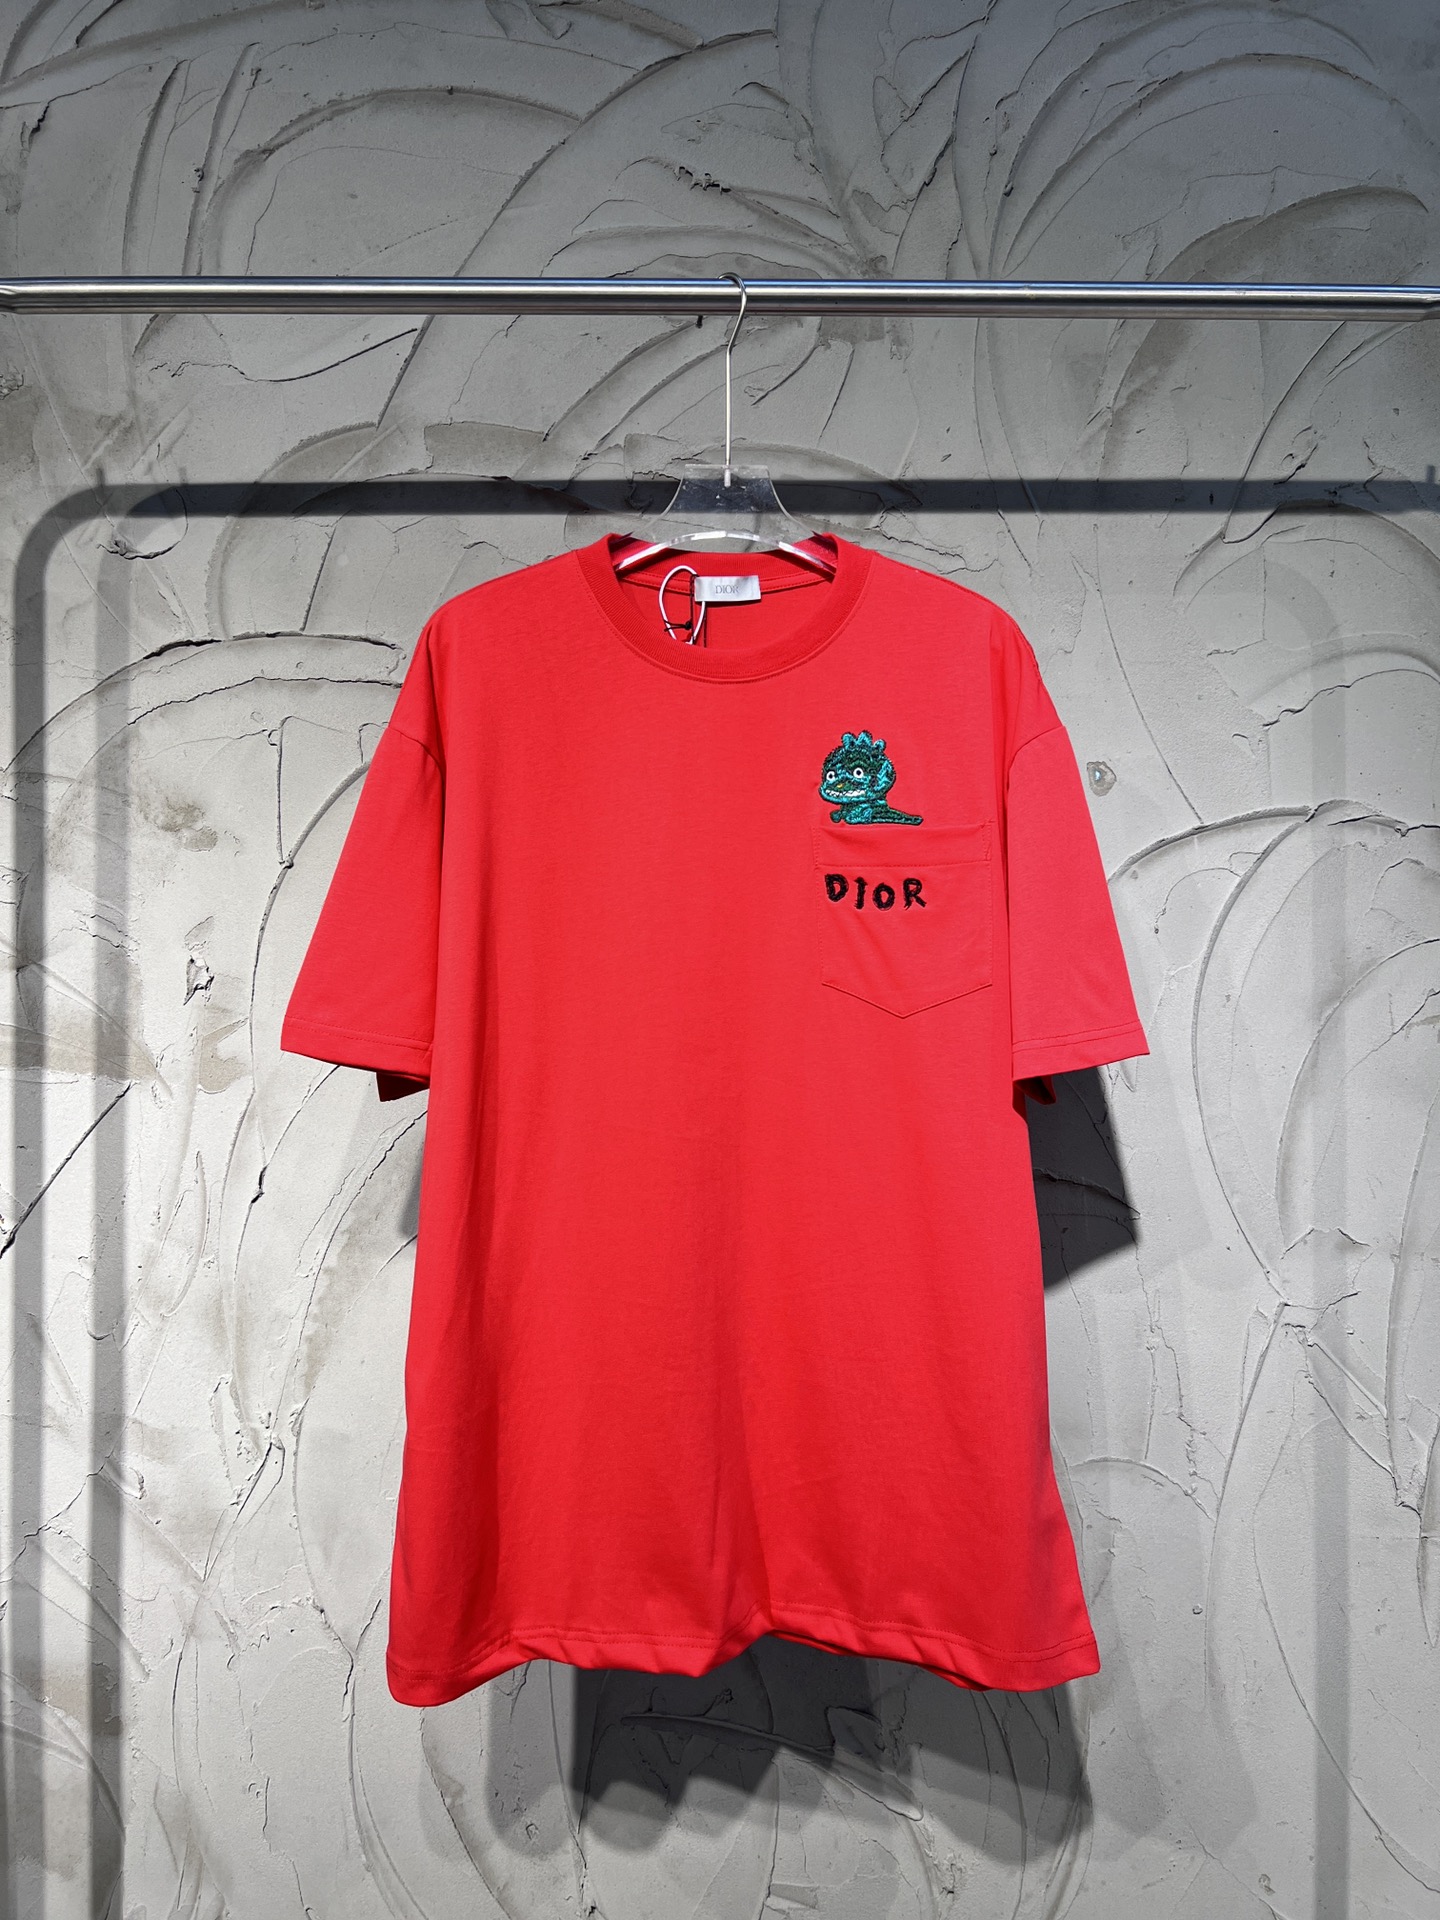 Dior Clothing T-Shirt Embroidery